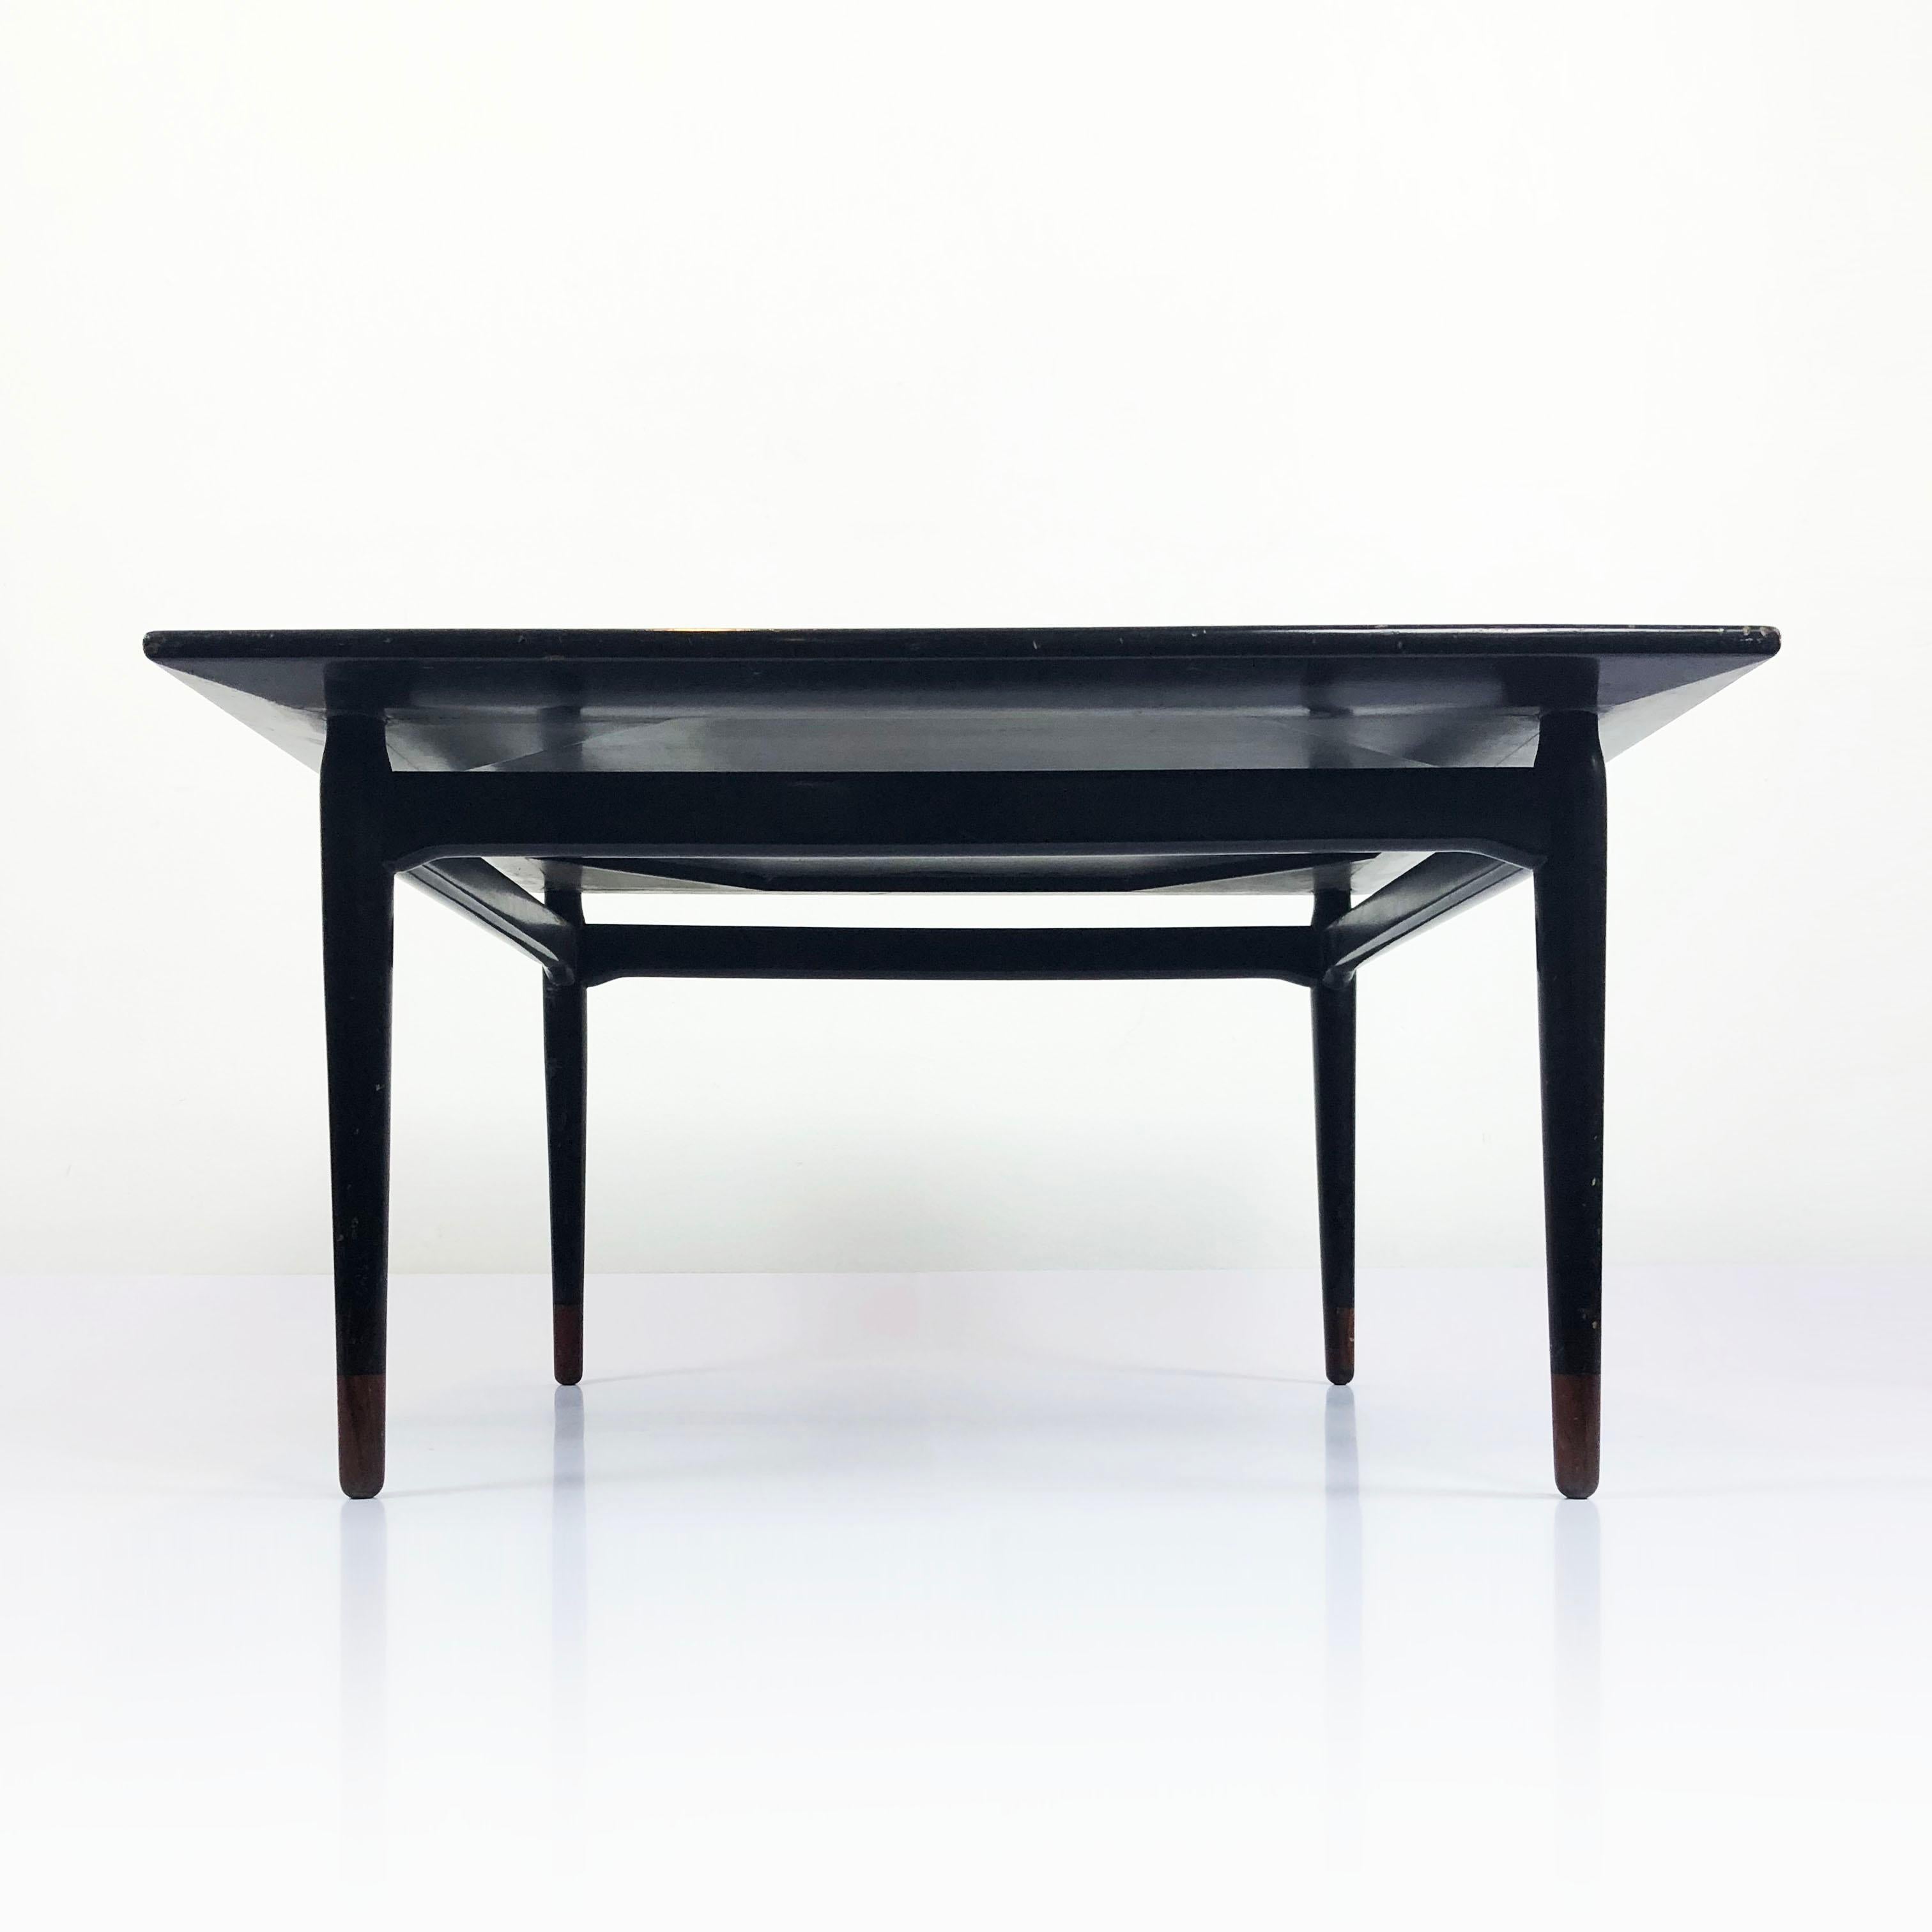 We offer this amazing table designed by Frank Kyle one of the most important designers of the midcentury Mexican Modernist, circa 1960. The table are made in mahogany wood with original lacquered black paint and with the characteristic duotone of